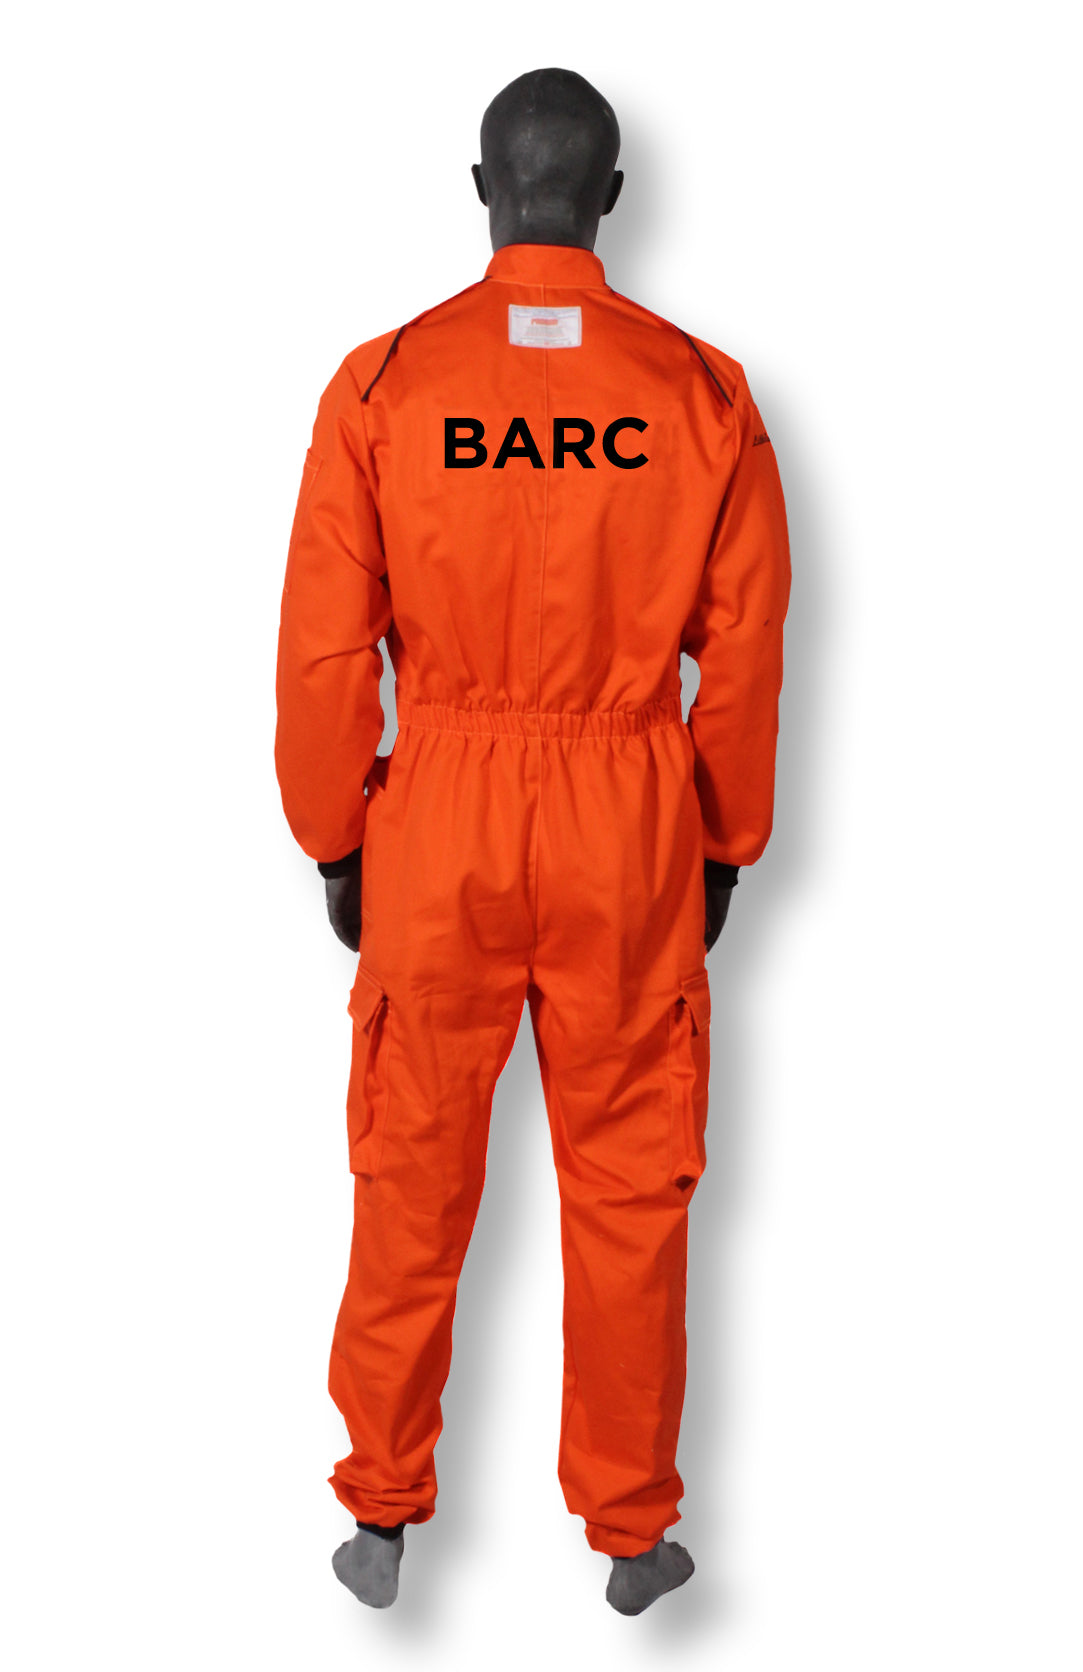 Official BARC Marshal Suit